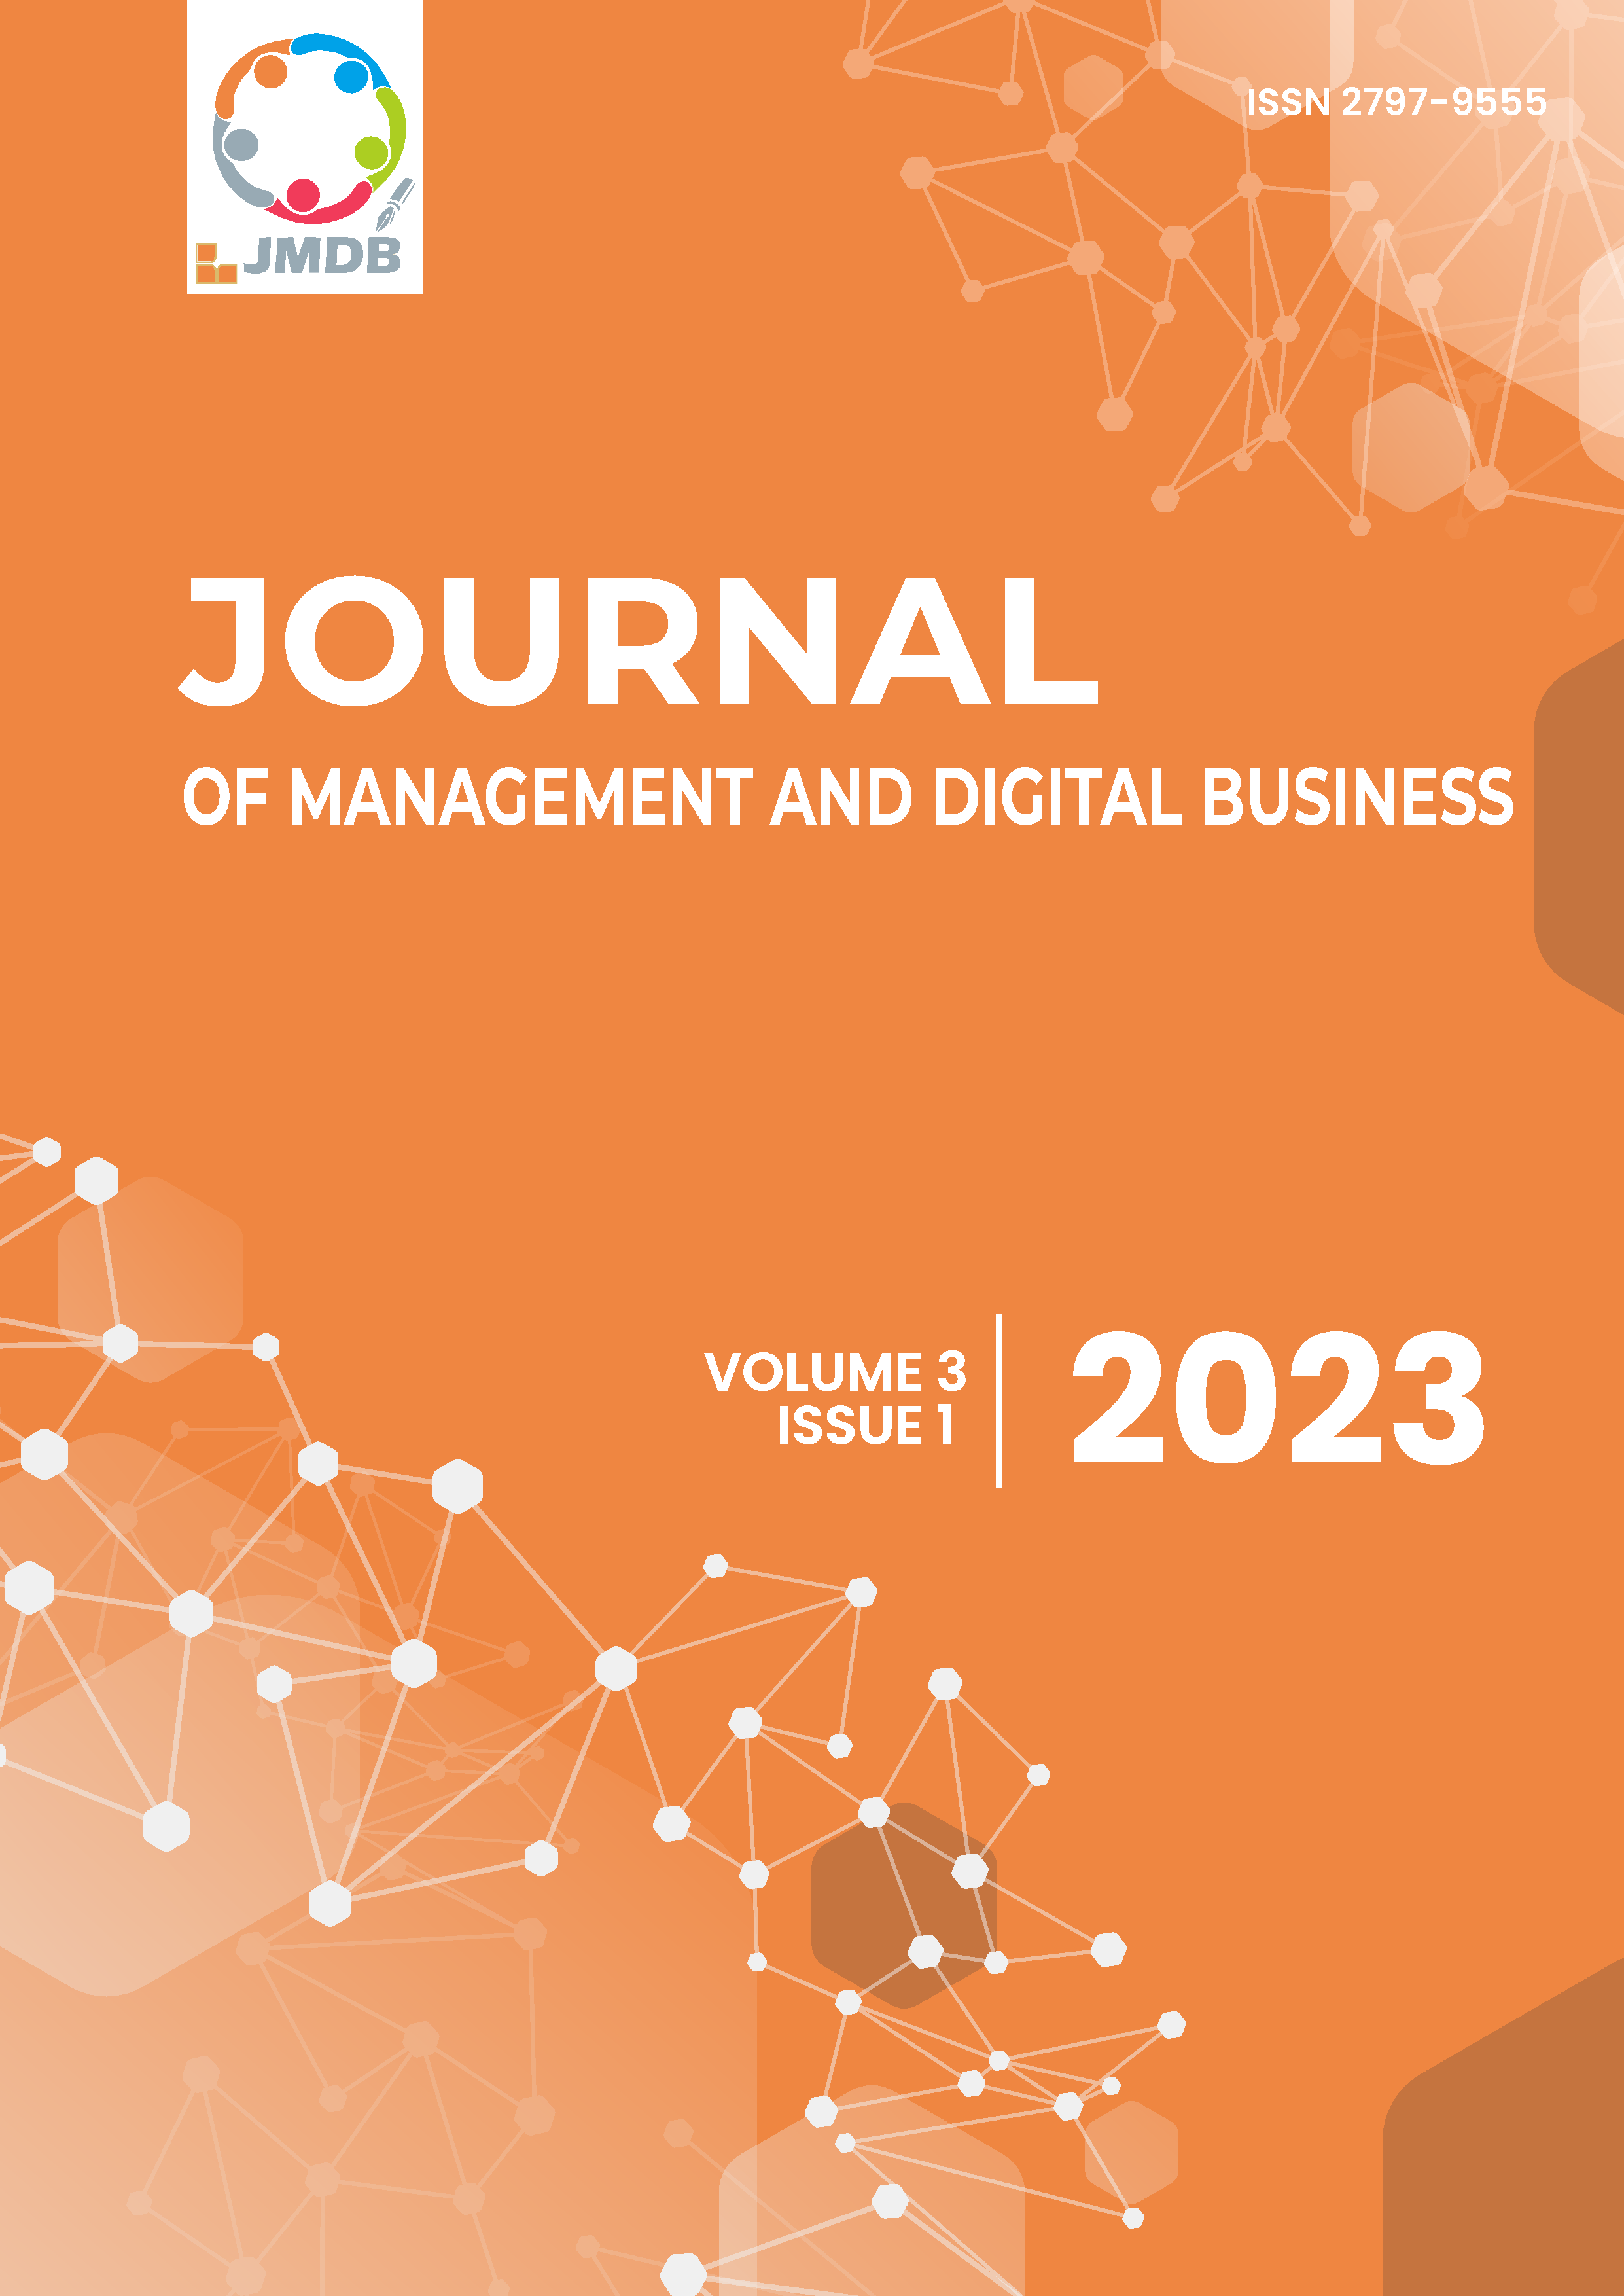 					View Vol. 3 No. 1 (2023): Journal of Management and Digital Business
				